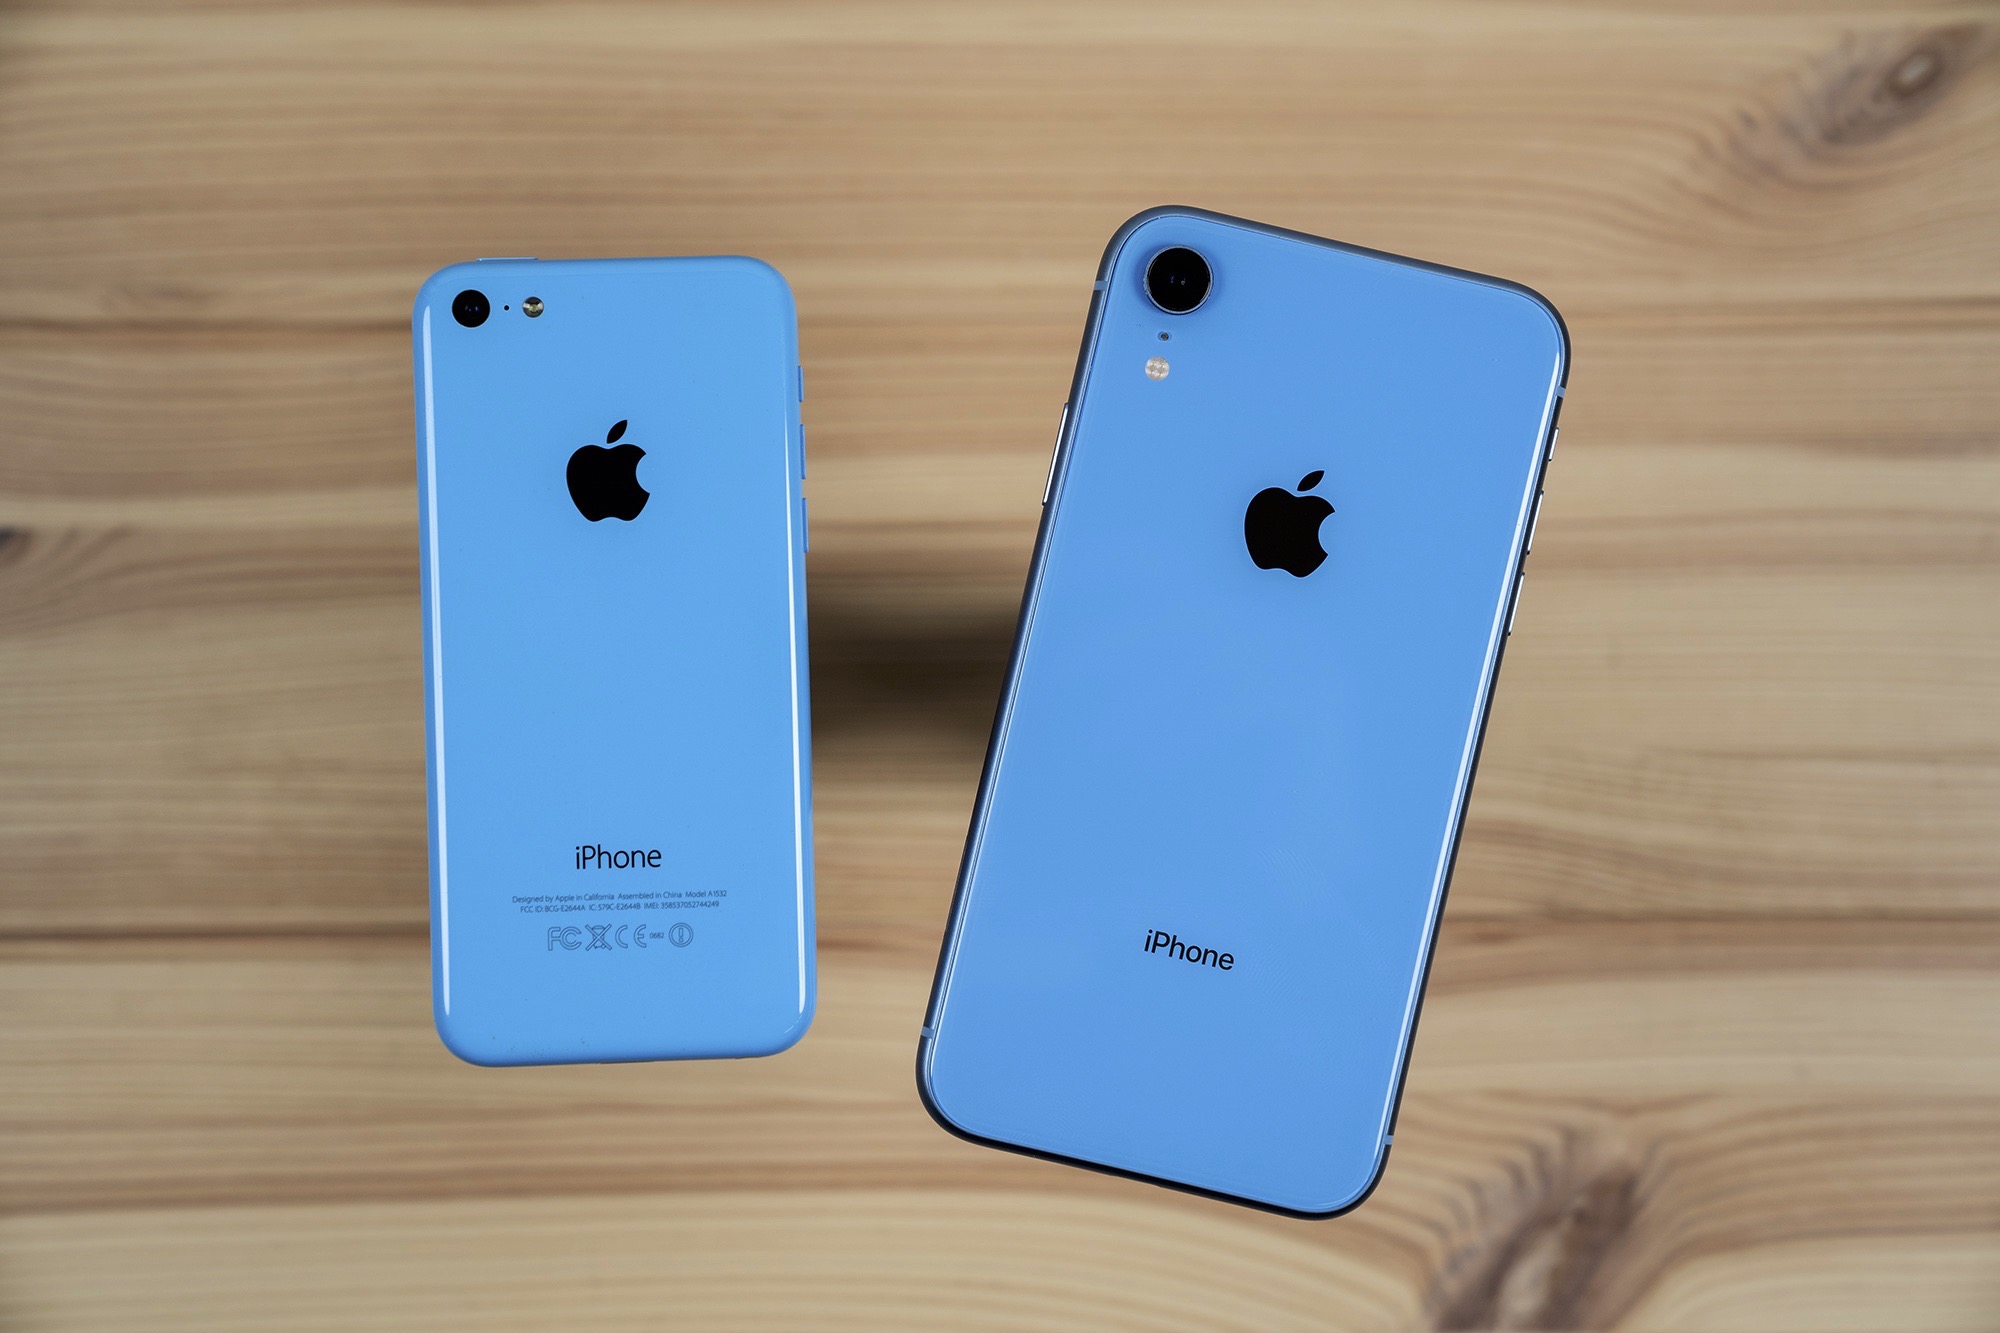 iPhone 5C review: Benchmarks, battery life, photo comparisons with iPhone 5